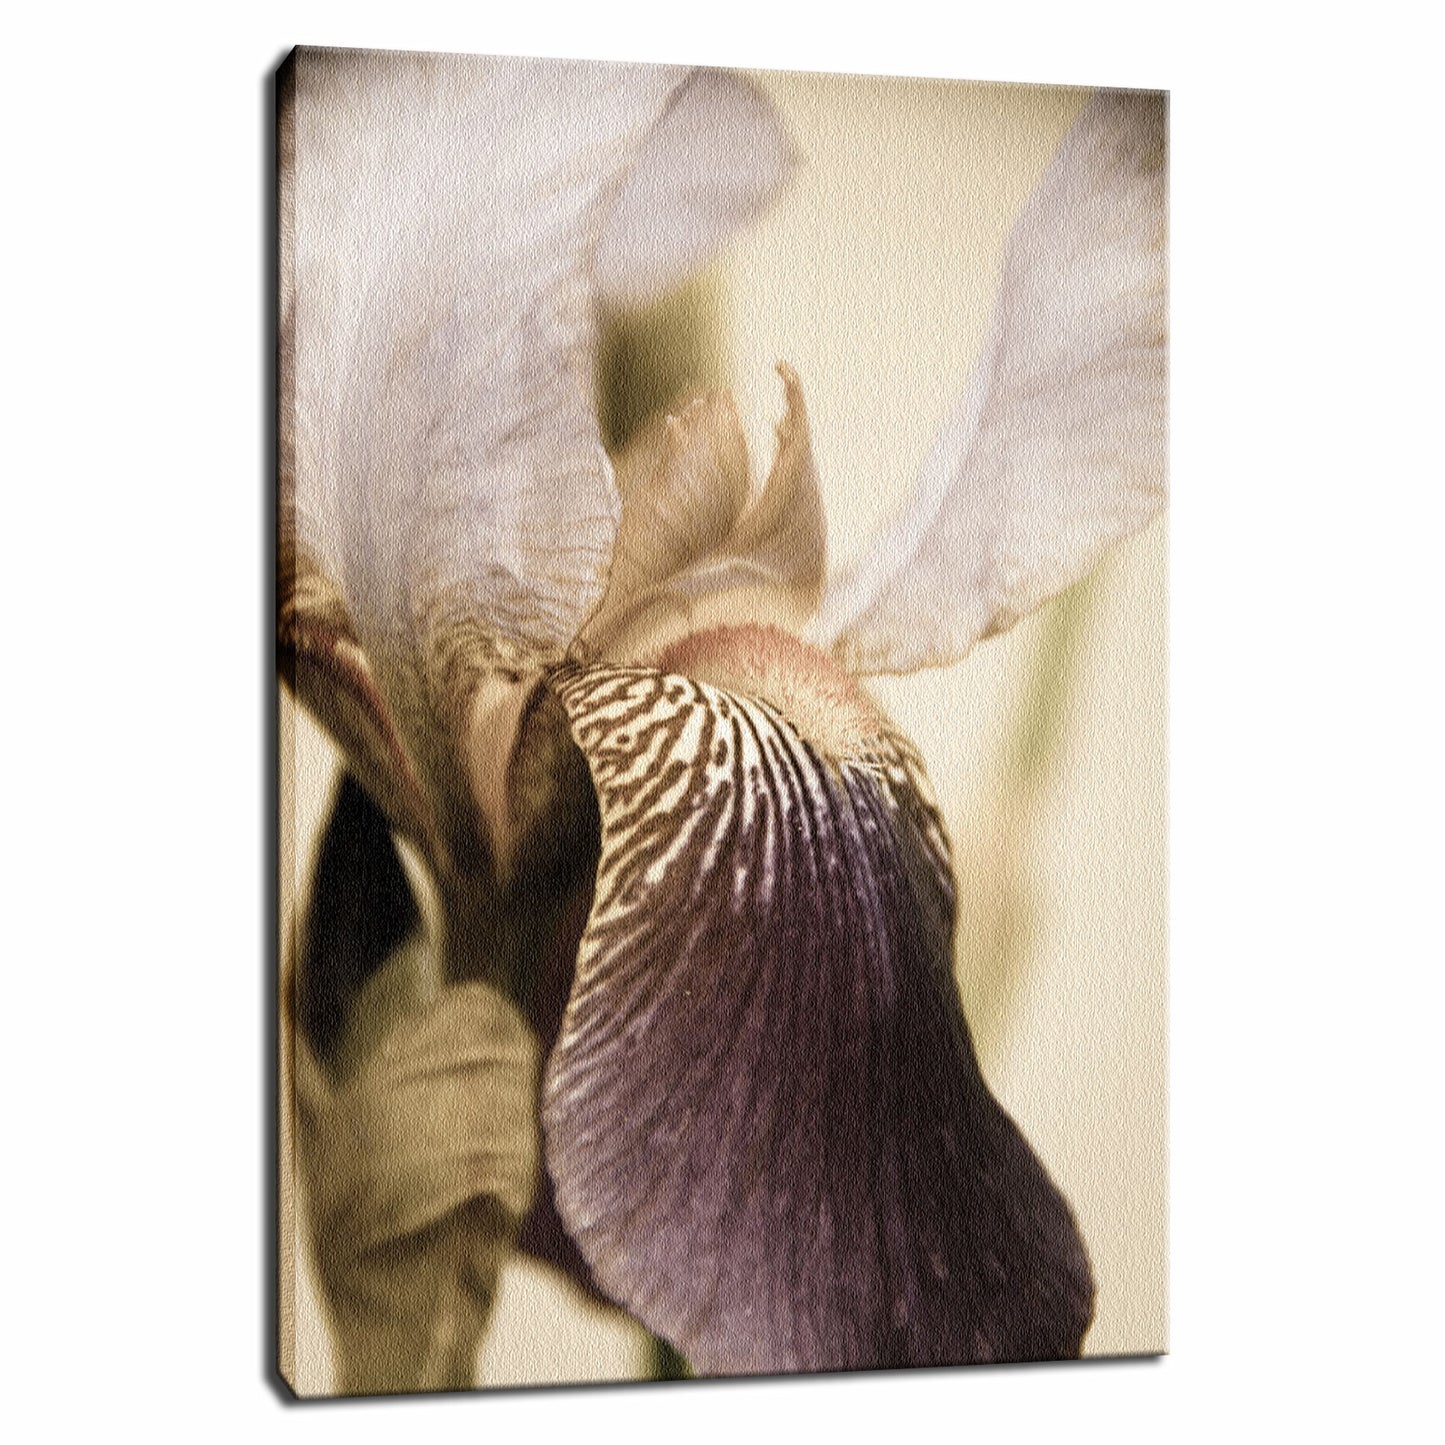 Japanese Iris Delight Aged Nature / Floral Photo Fine Art Canvas Wall Art Prints  - PIPAFINEART